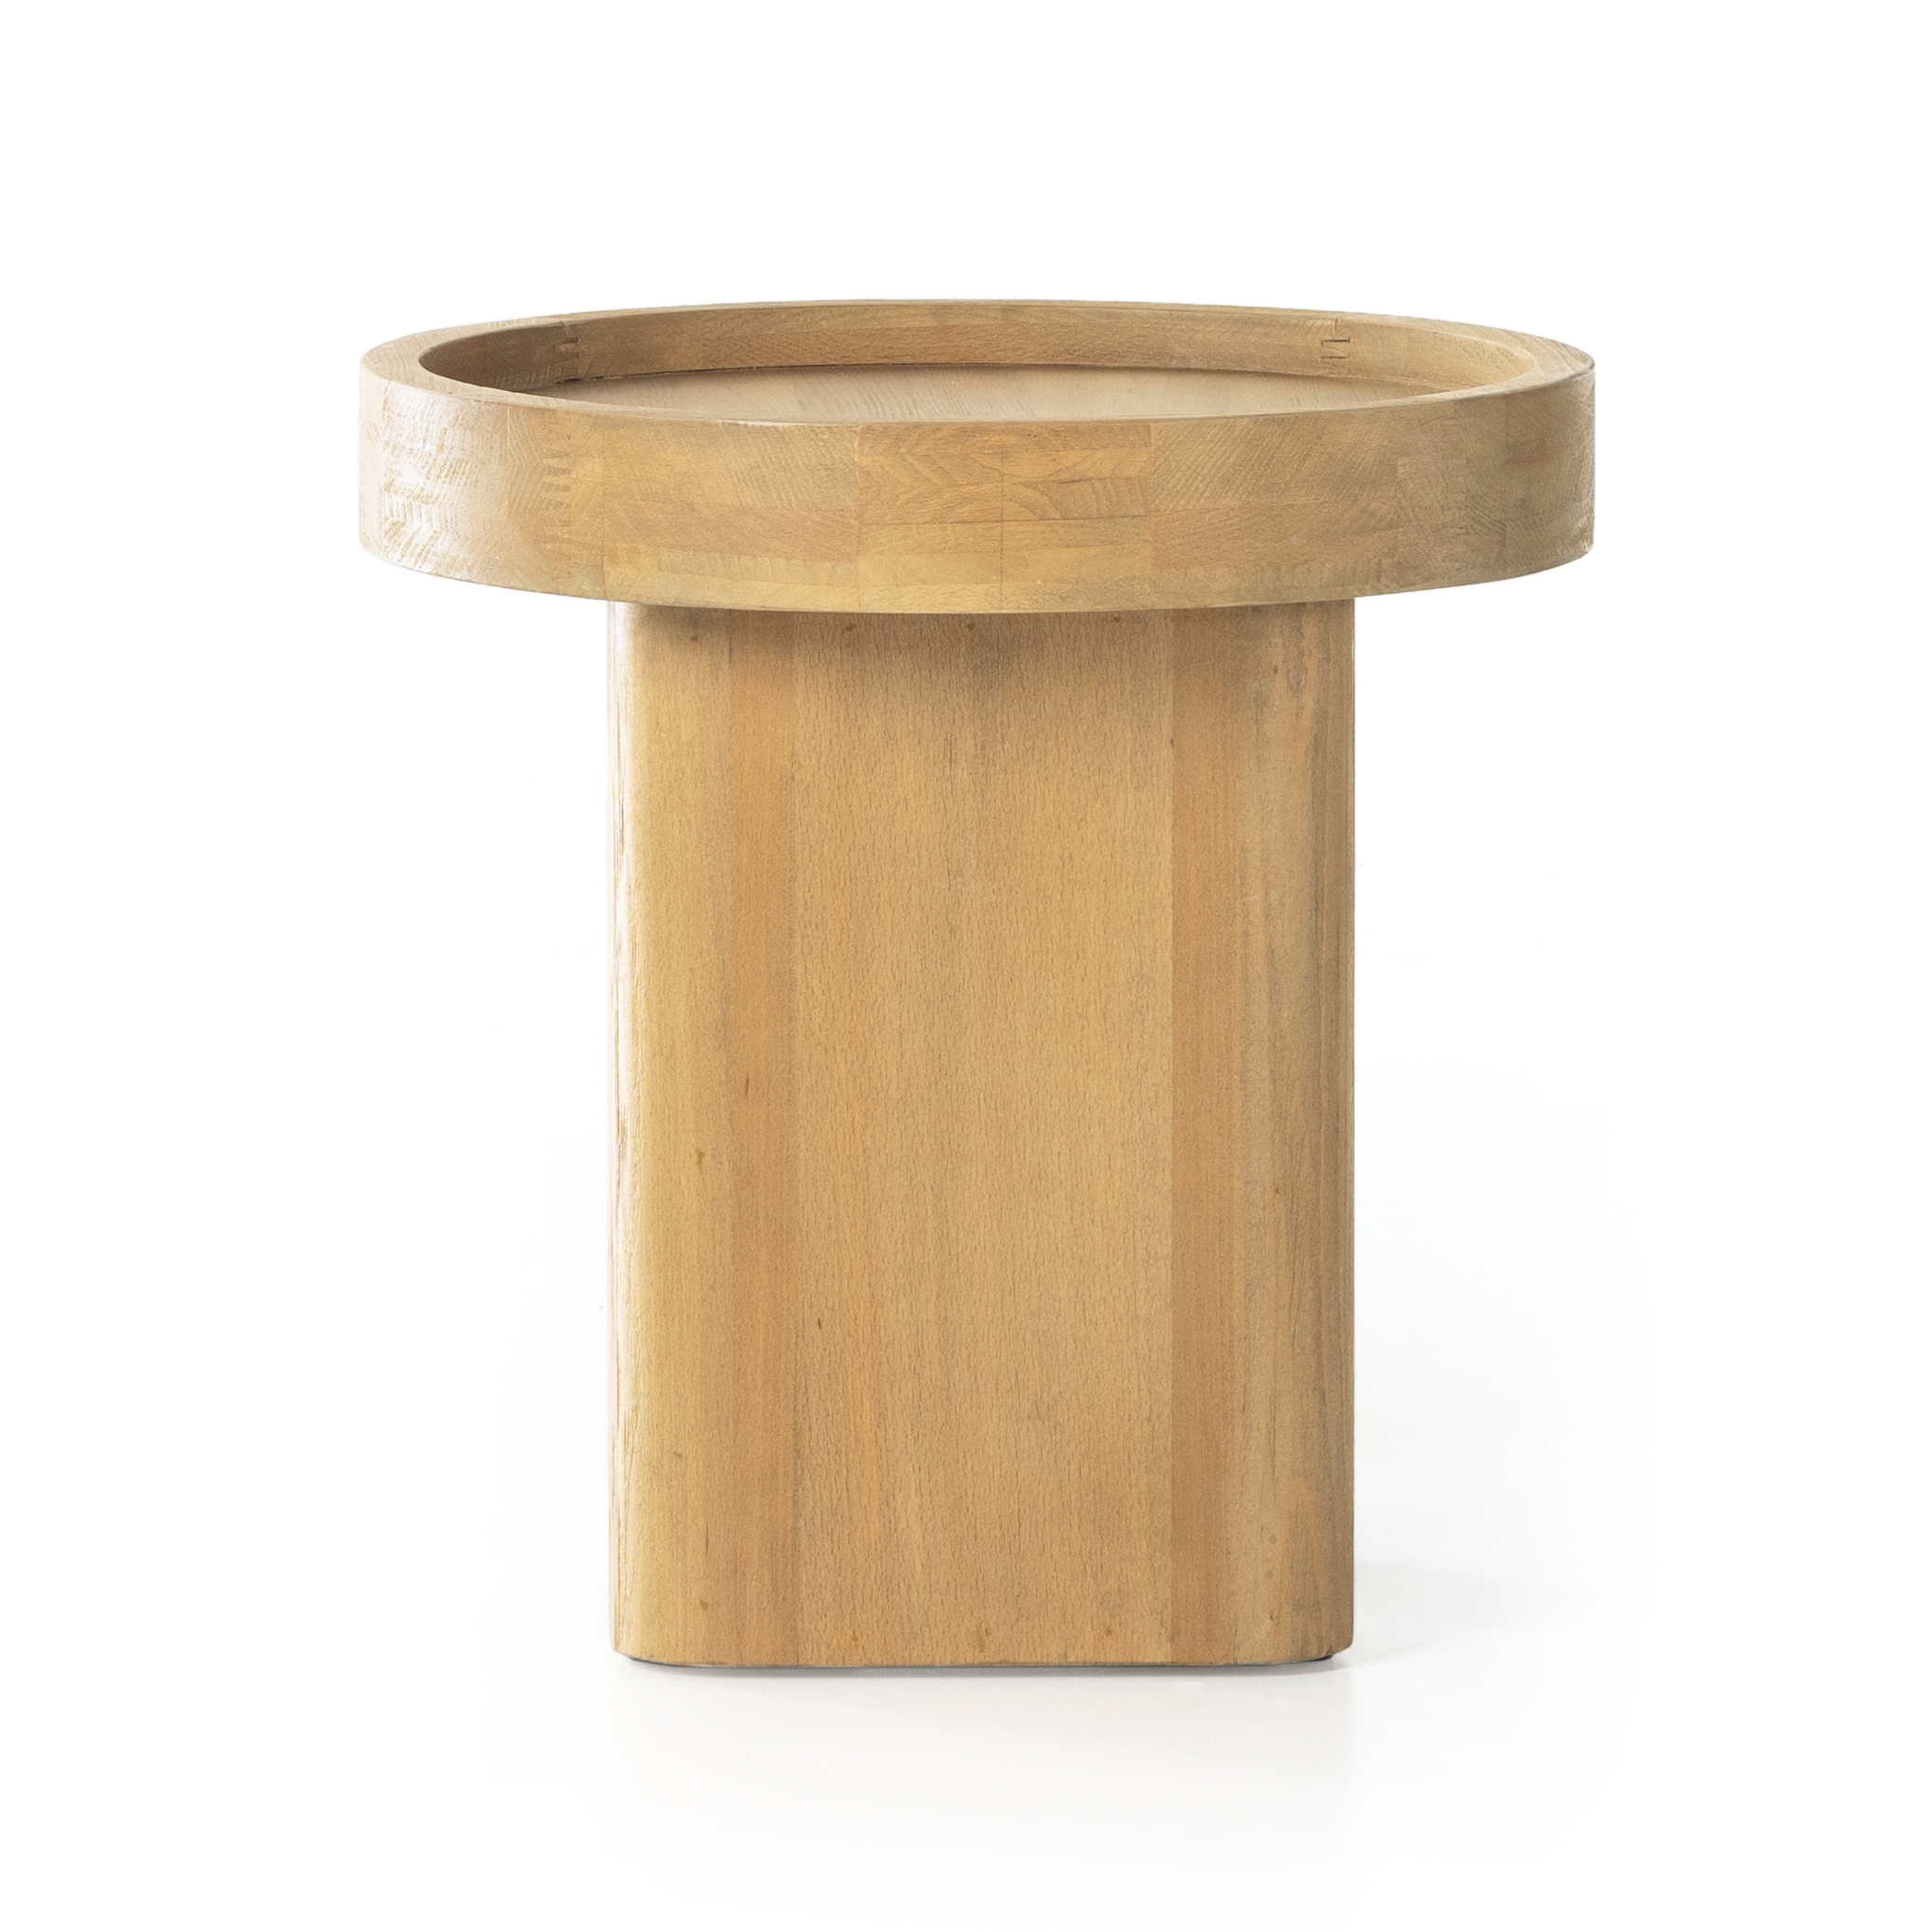 Schwell End Table-Natural Beech - Image 7